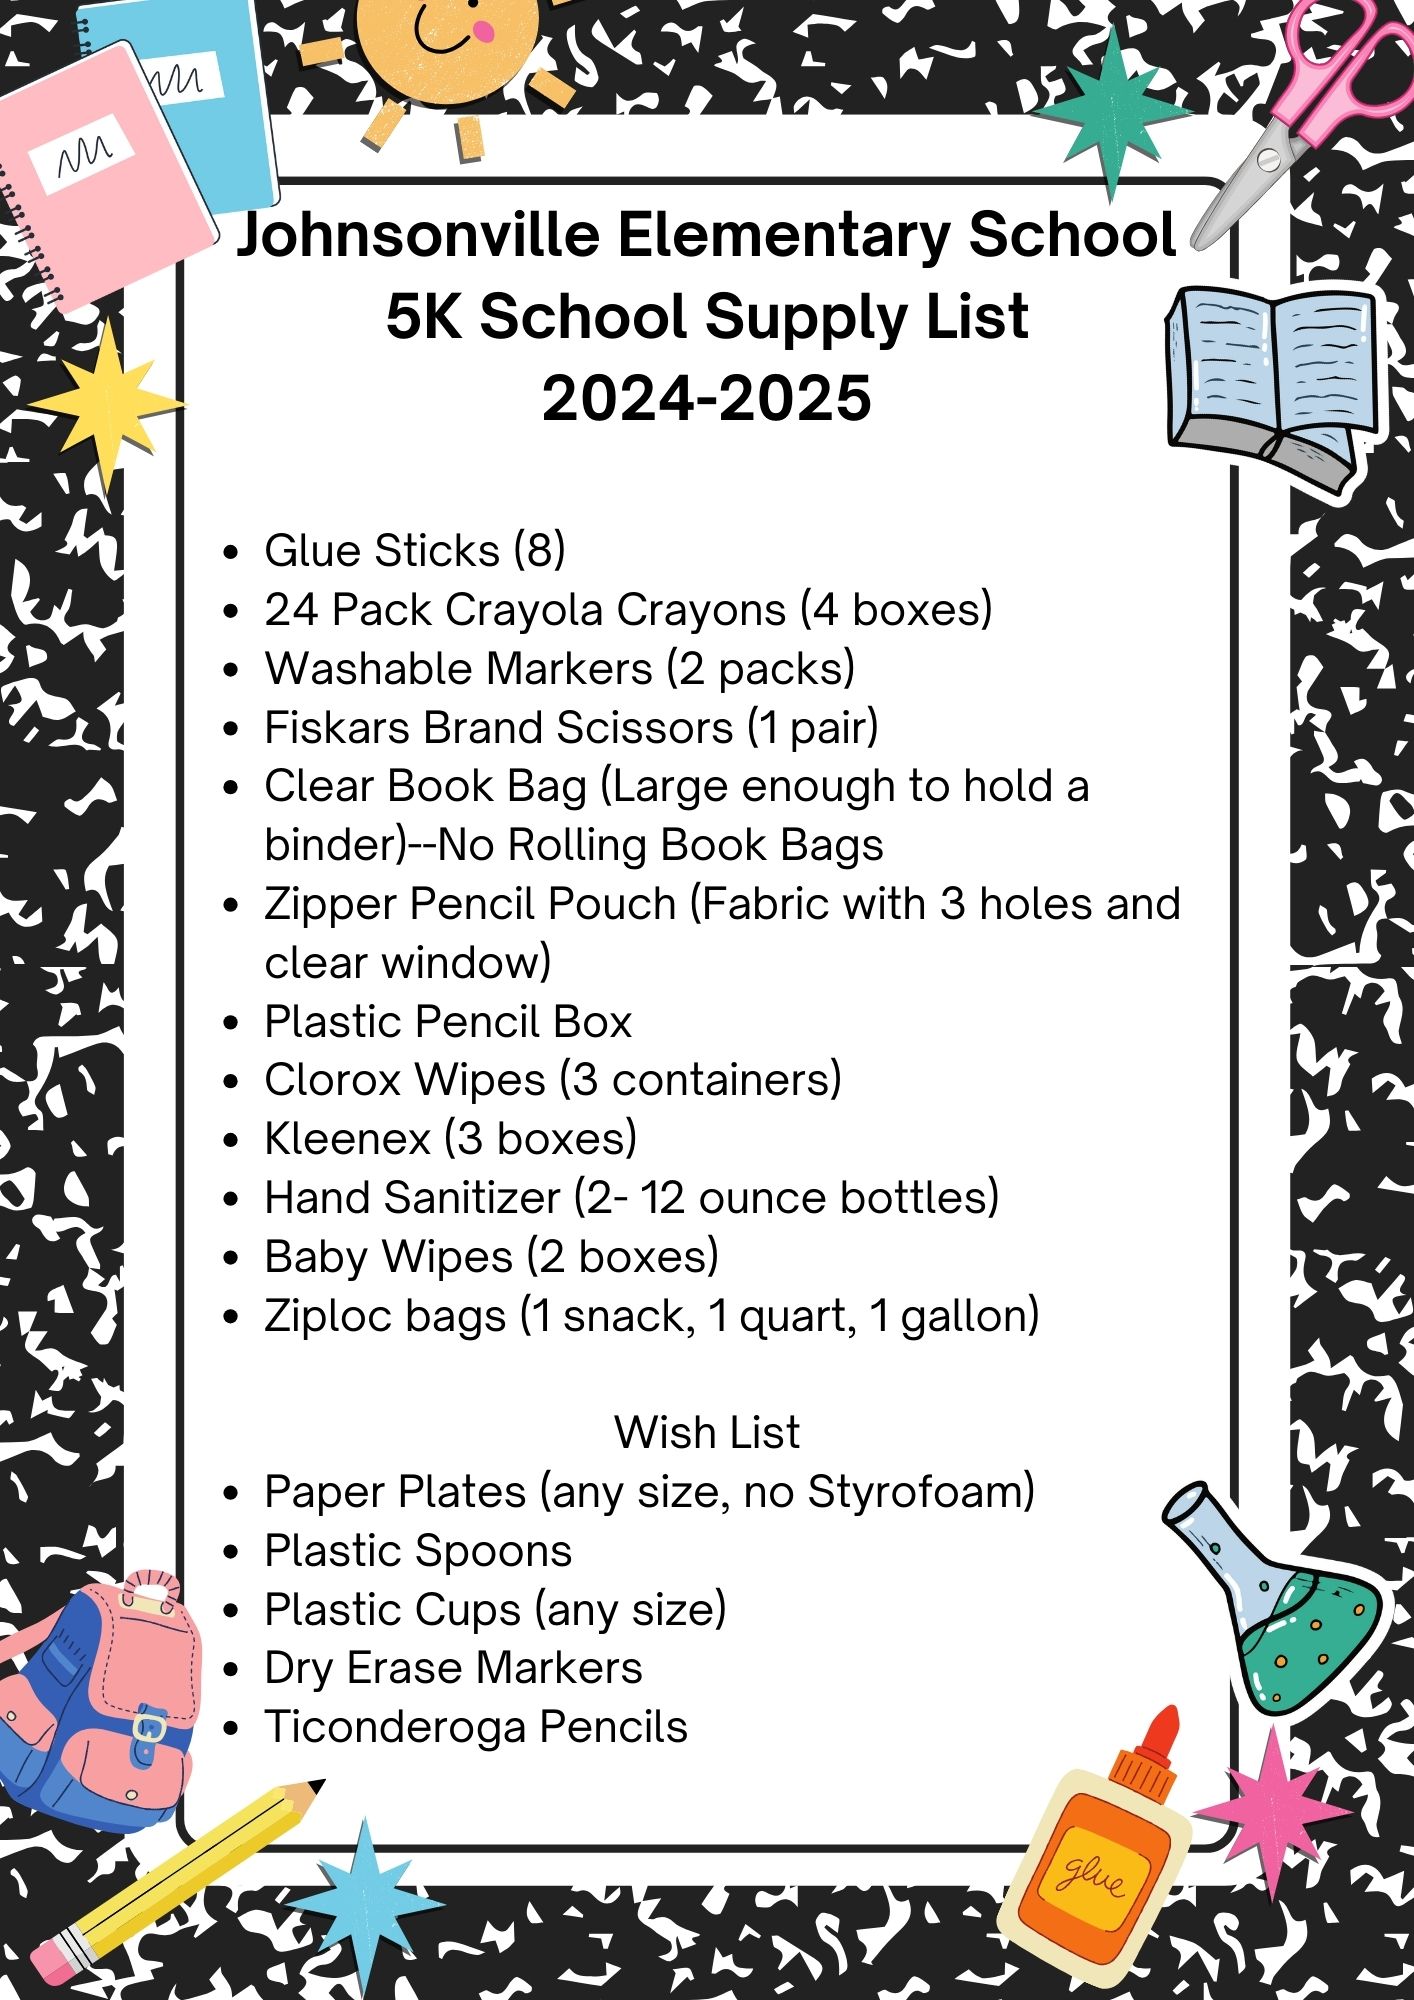 School Supply List 2023-2024 – For Parents – Lee Means Elementary